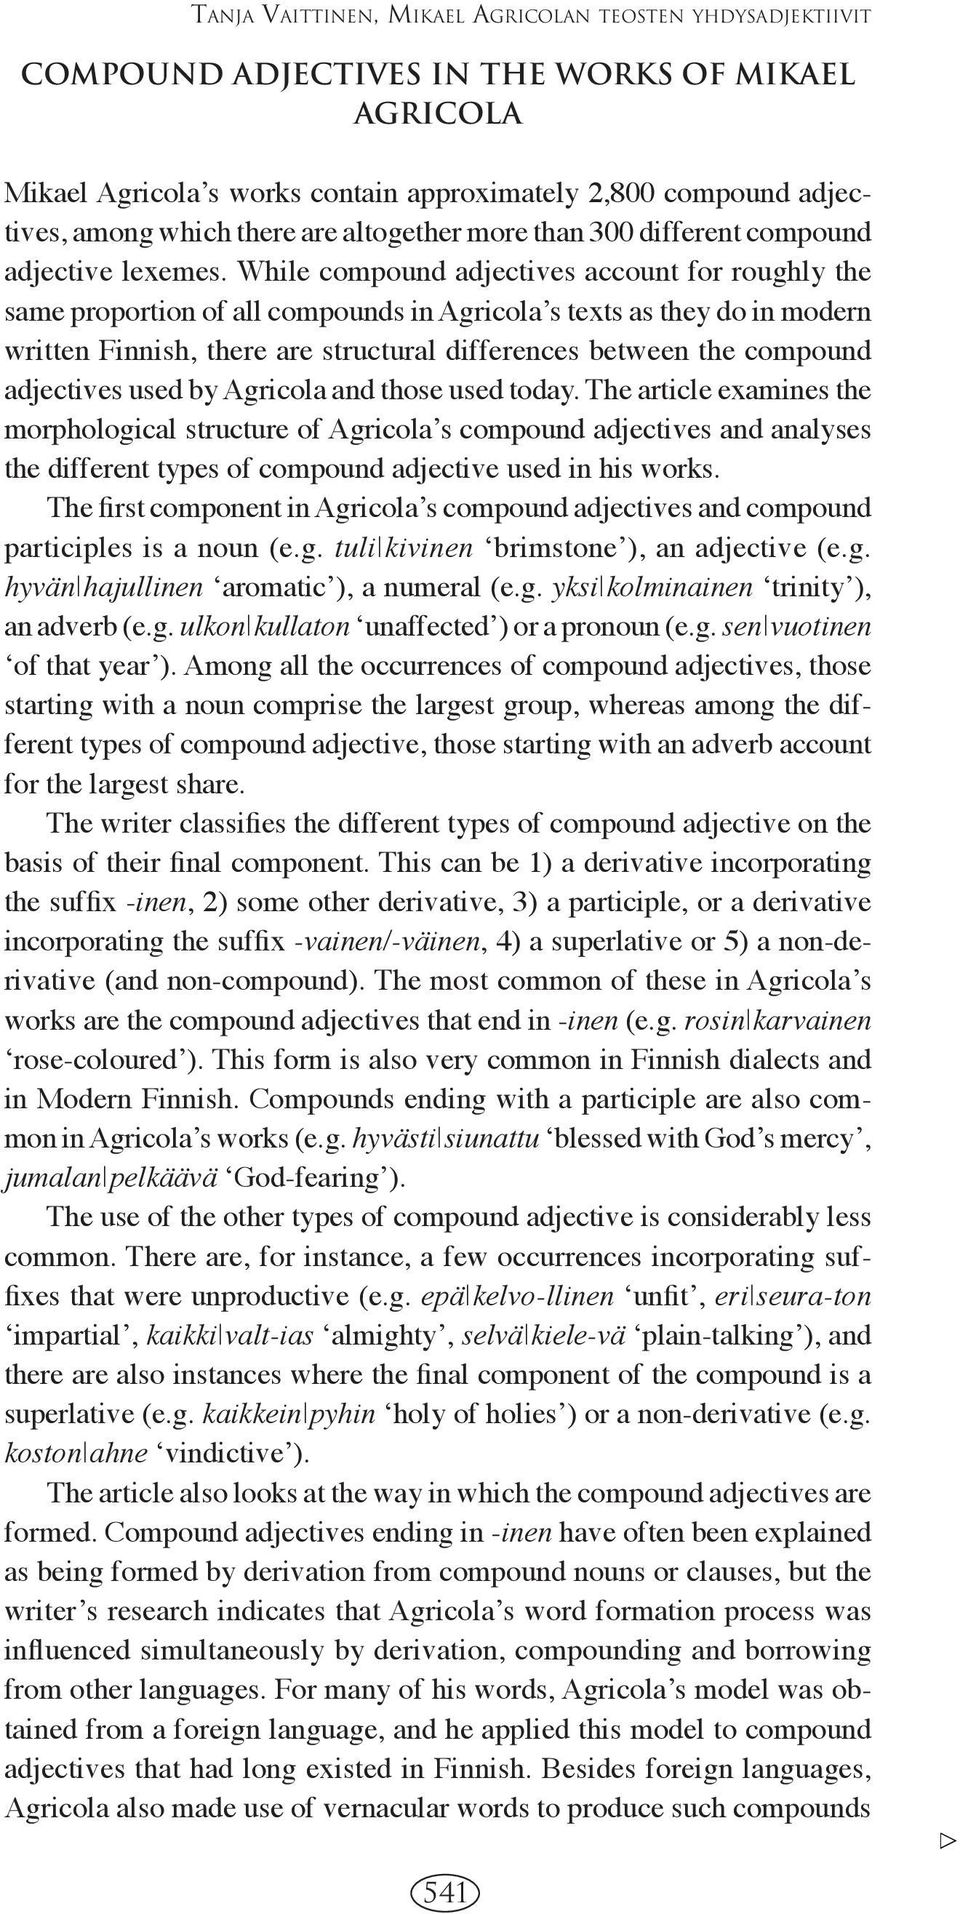 While compound adjectives account for roughly the same proportion of all compounds in Agricolaʼs texts as they do in modern written Finnish, there are structural differences between the compound